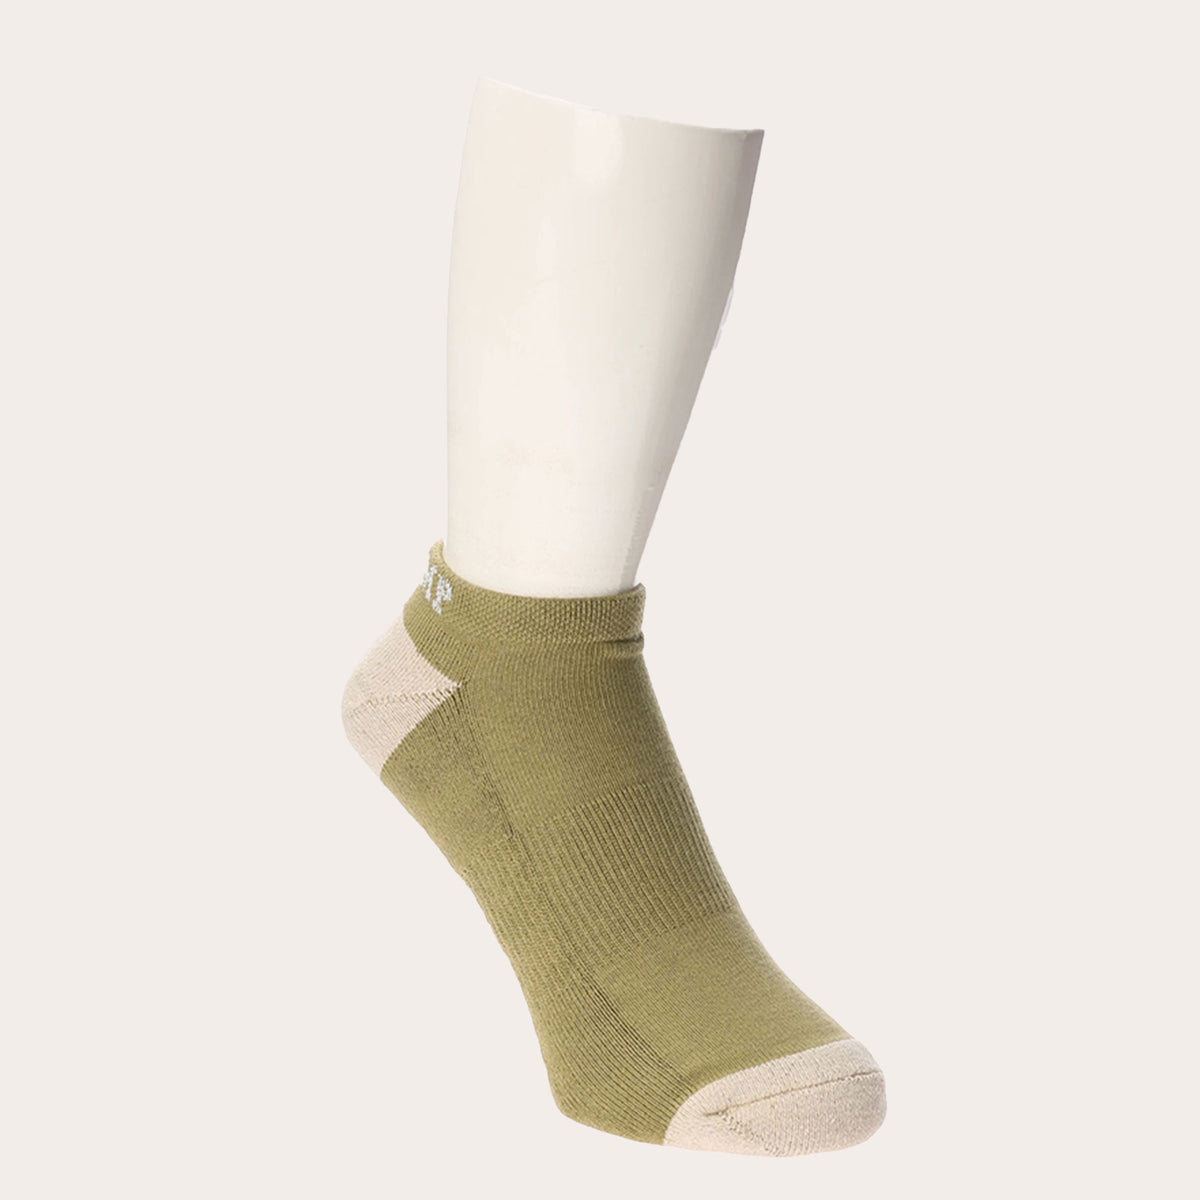 Shop Our Anonymous Ism Socks | Master Sock Makers